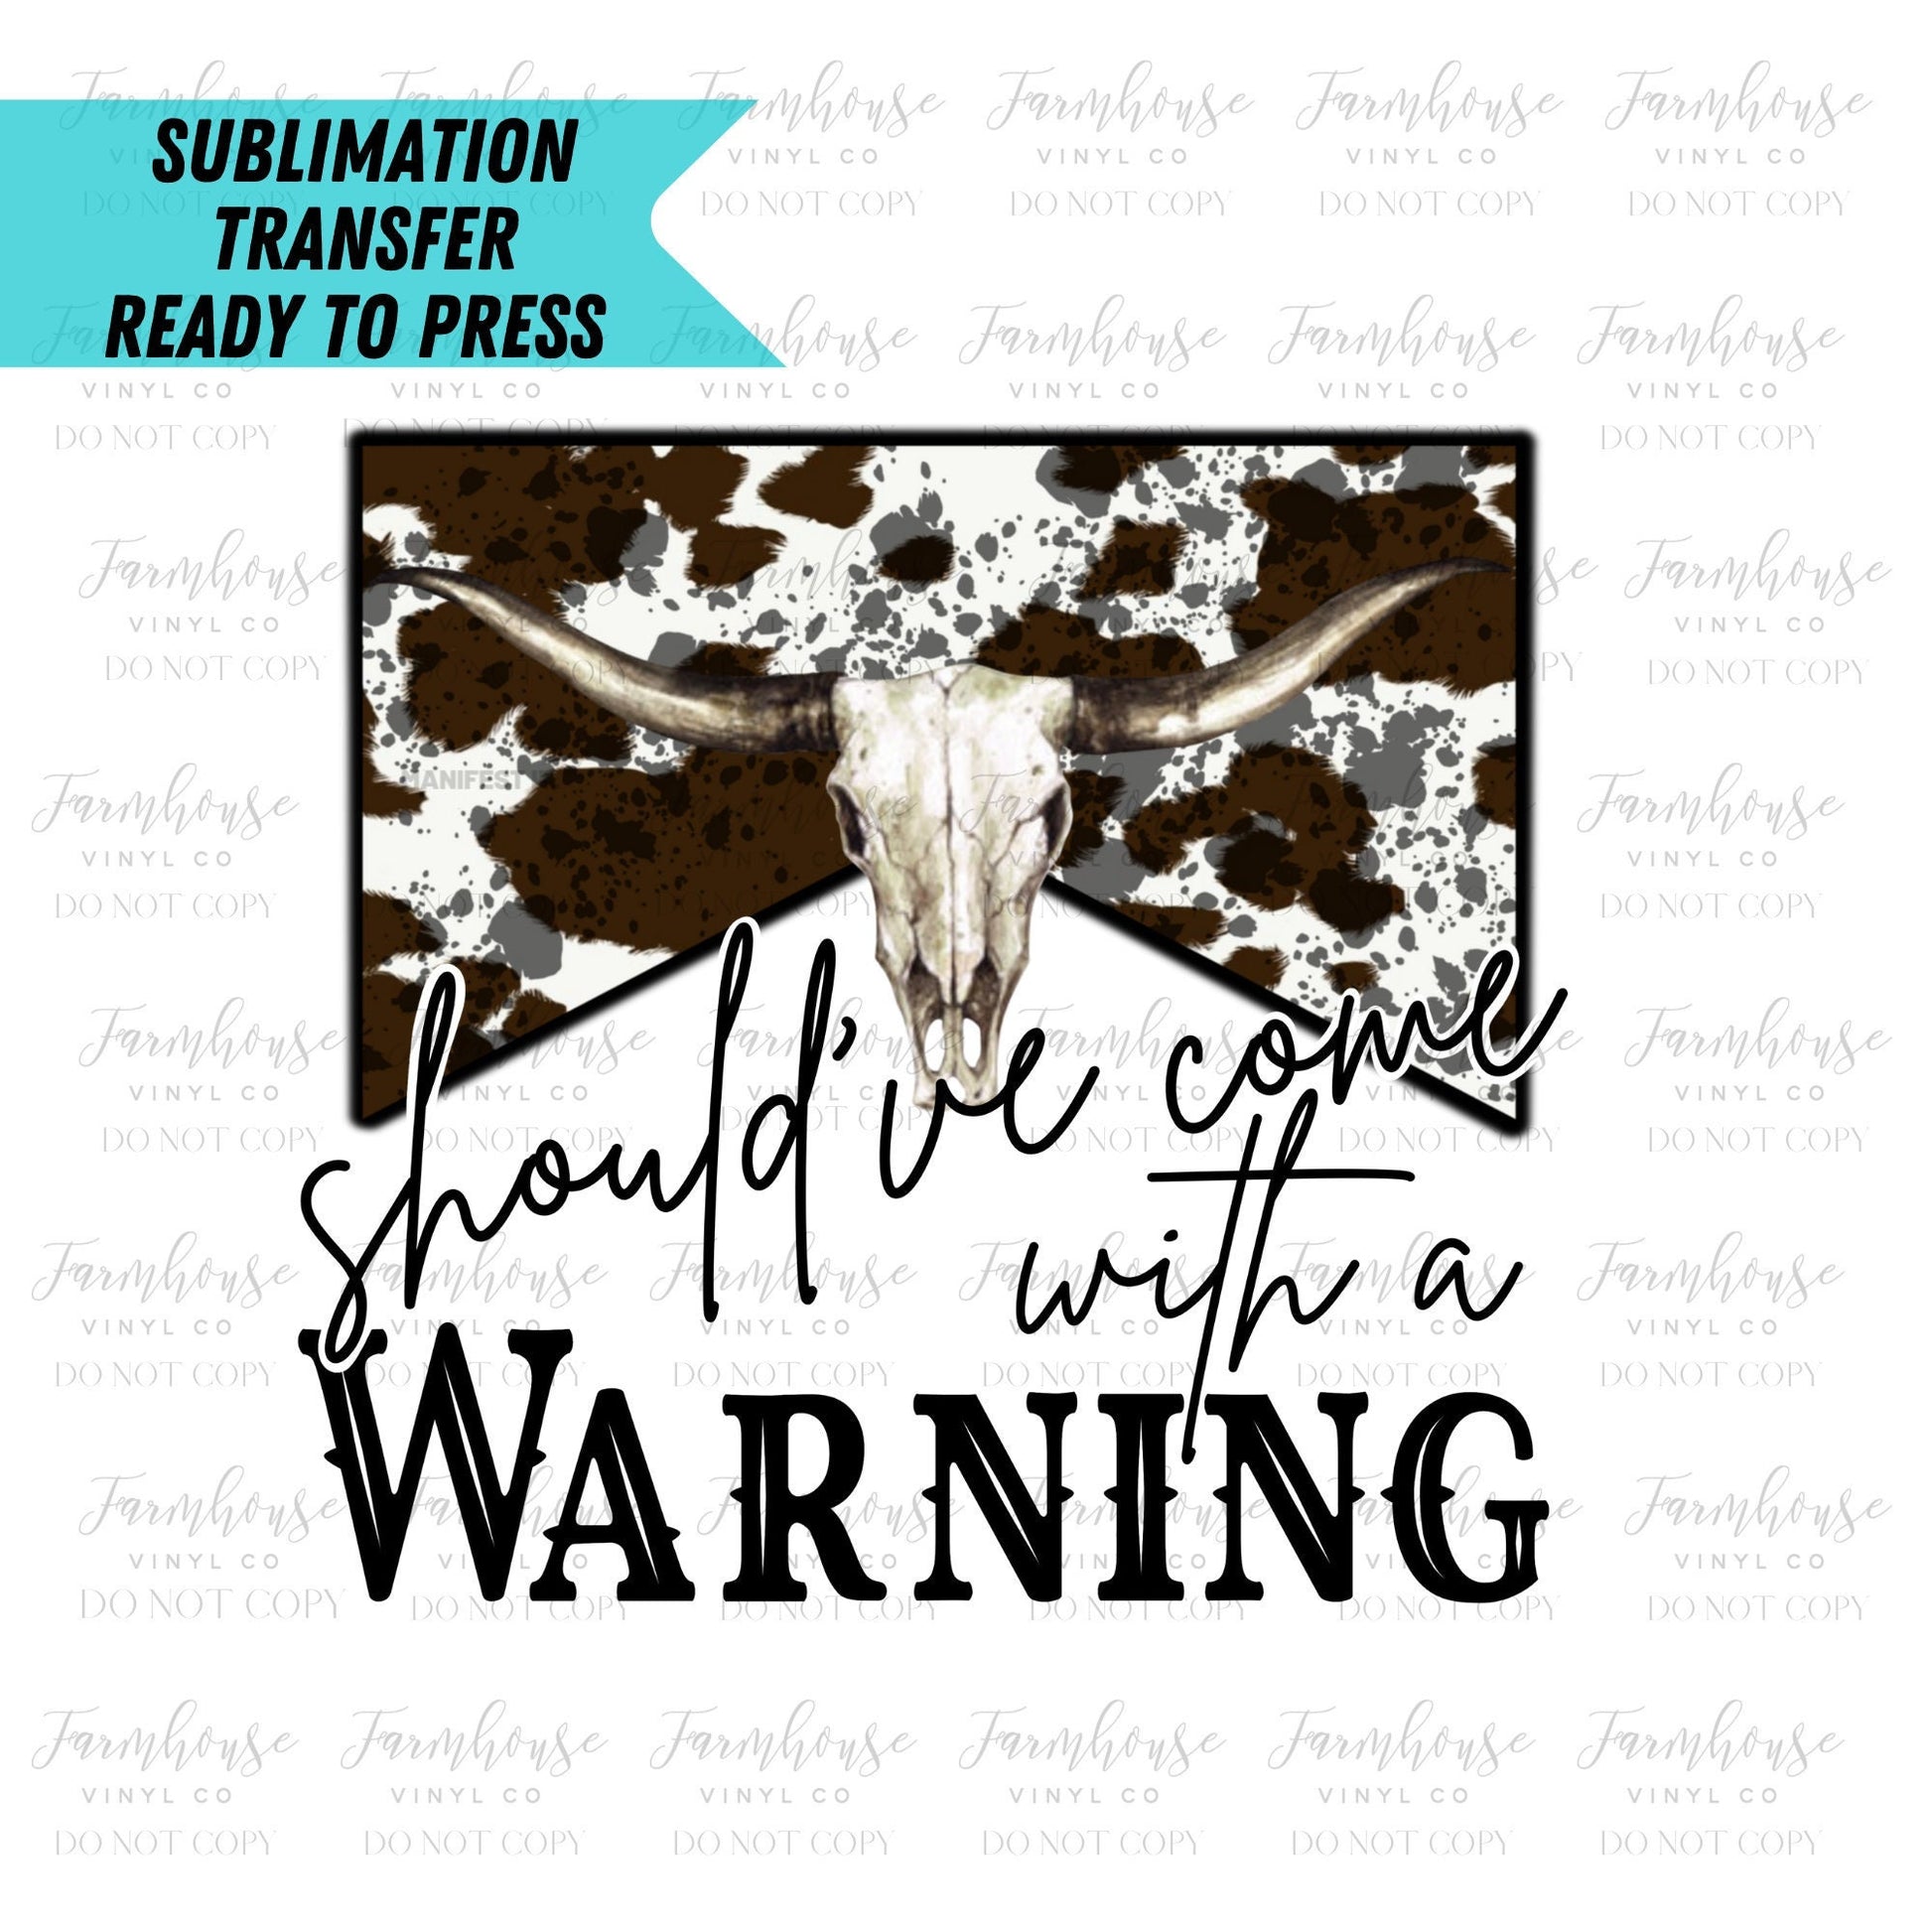 Should’ve Come with a Warning, Ready To Press, Sublimation Transfers, Sublimation Print, Transfer Ready To Press, Country Music Design - Farmhouse Vinyl Co